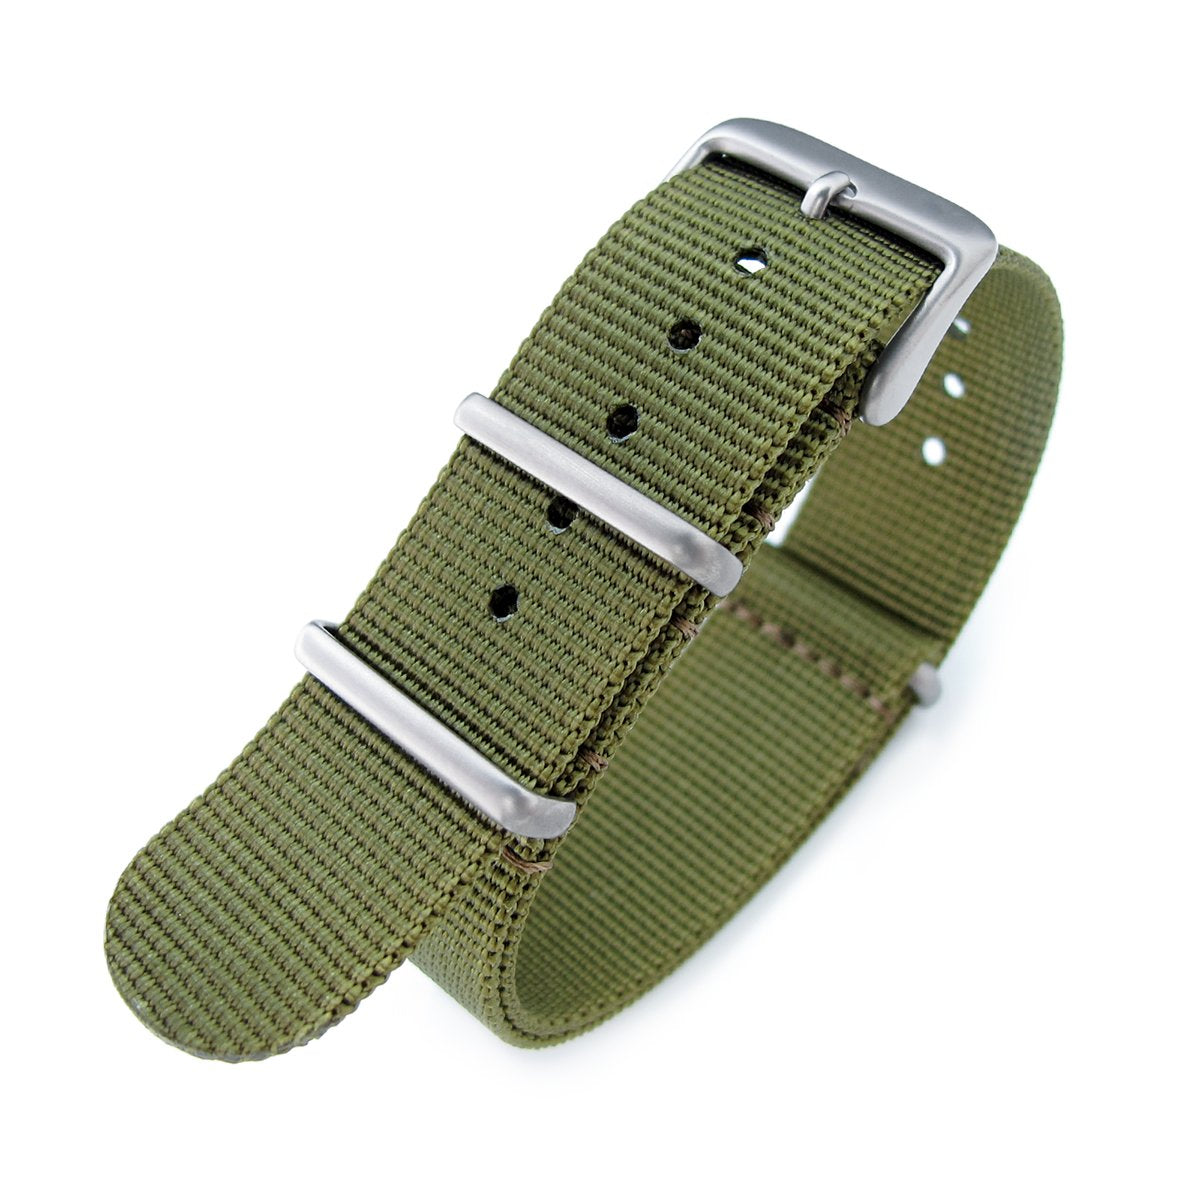 NATO 20mm G10 Military Watch Band Nylon Strap Military Green Sandblasted 260mm Strapcode Watch Bands